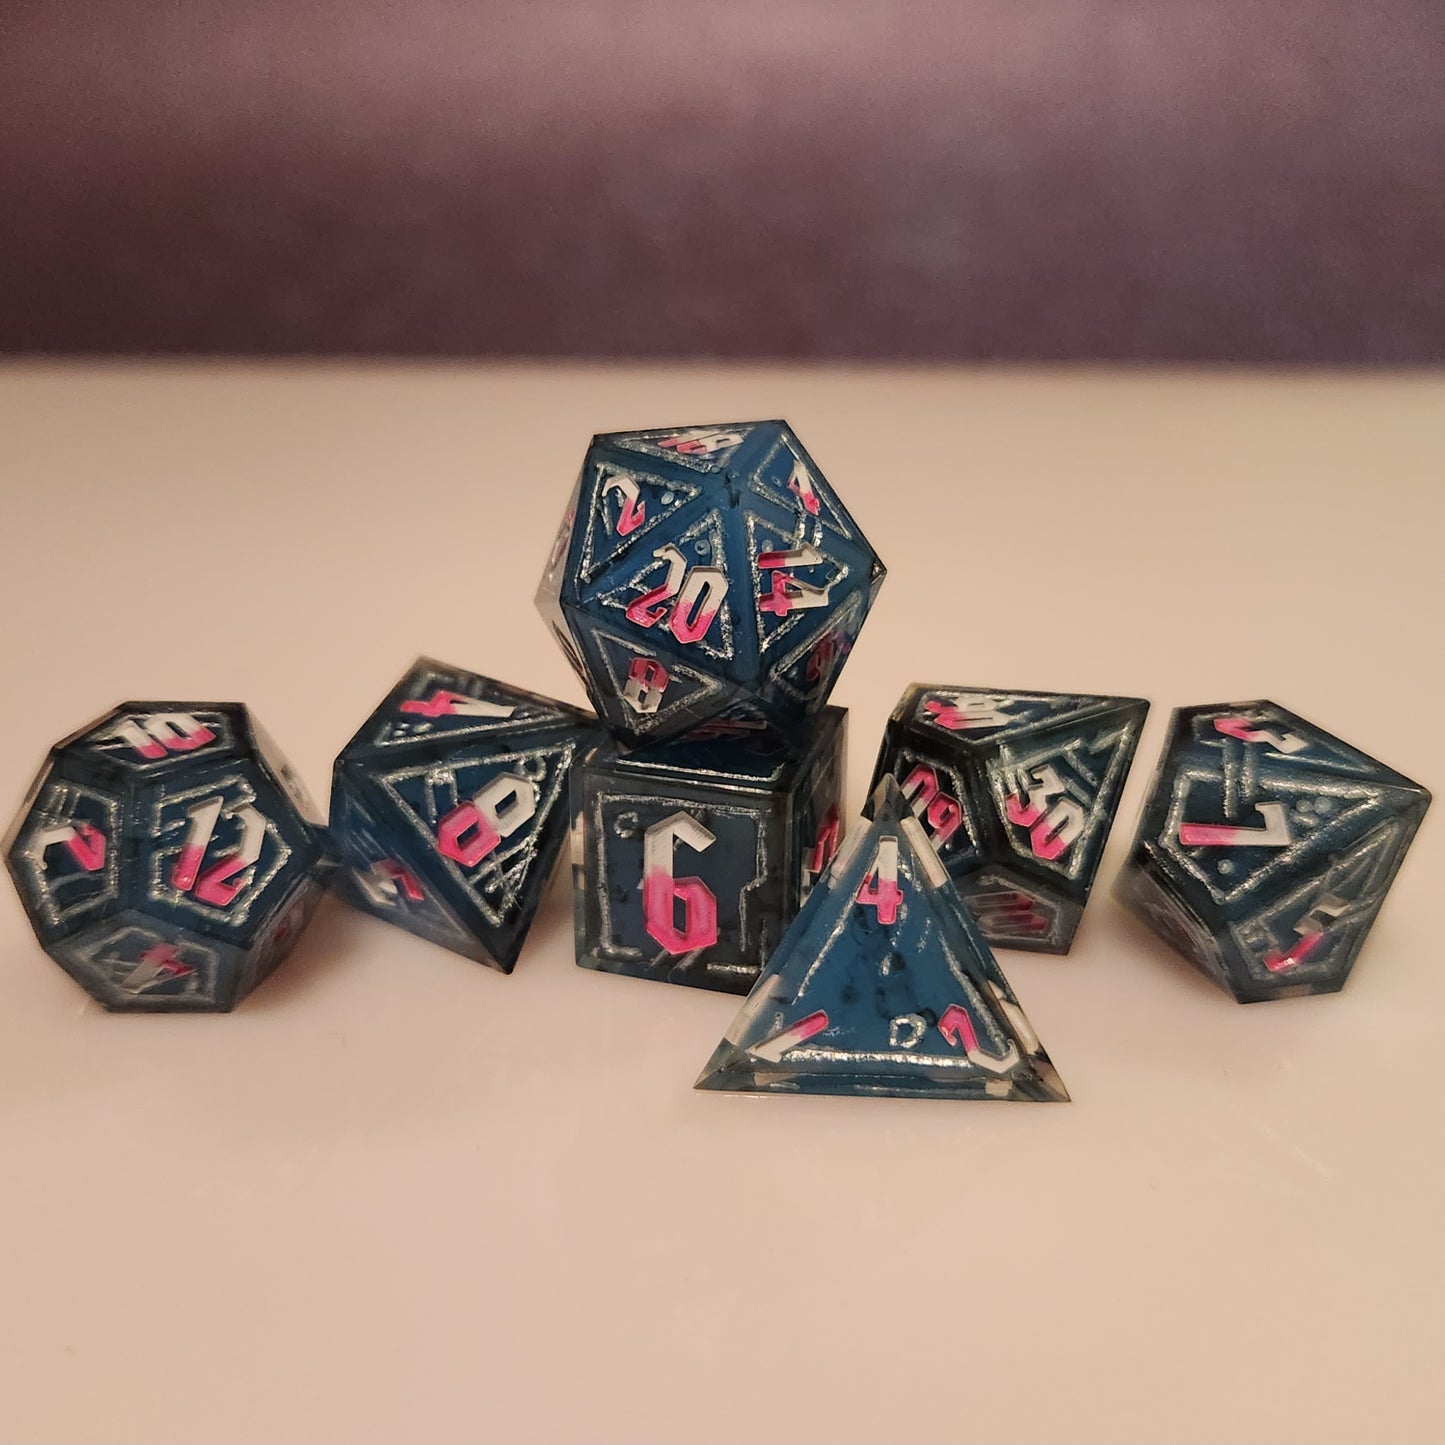 Paladin Mike Inspired Dice Set